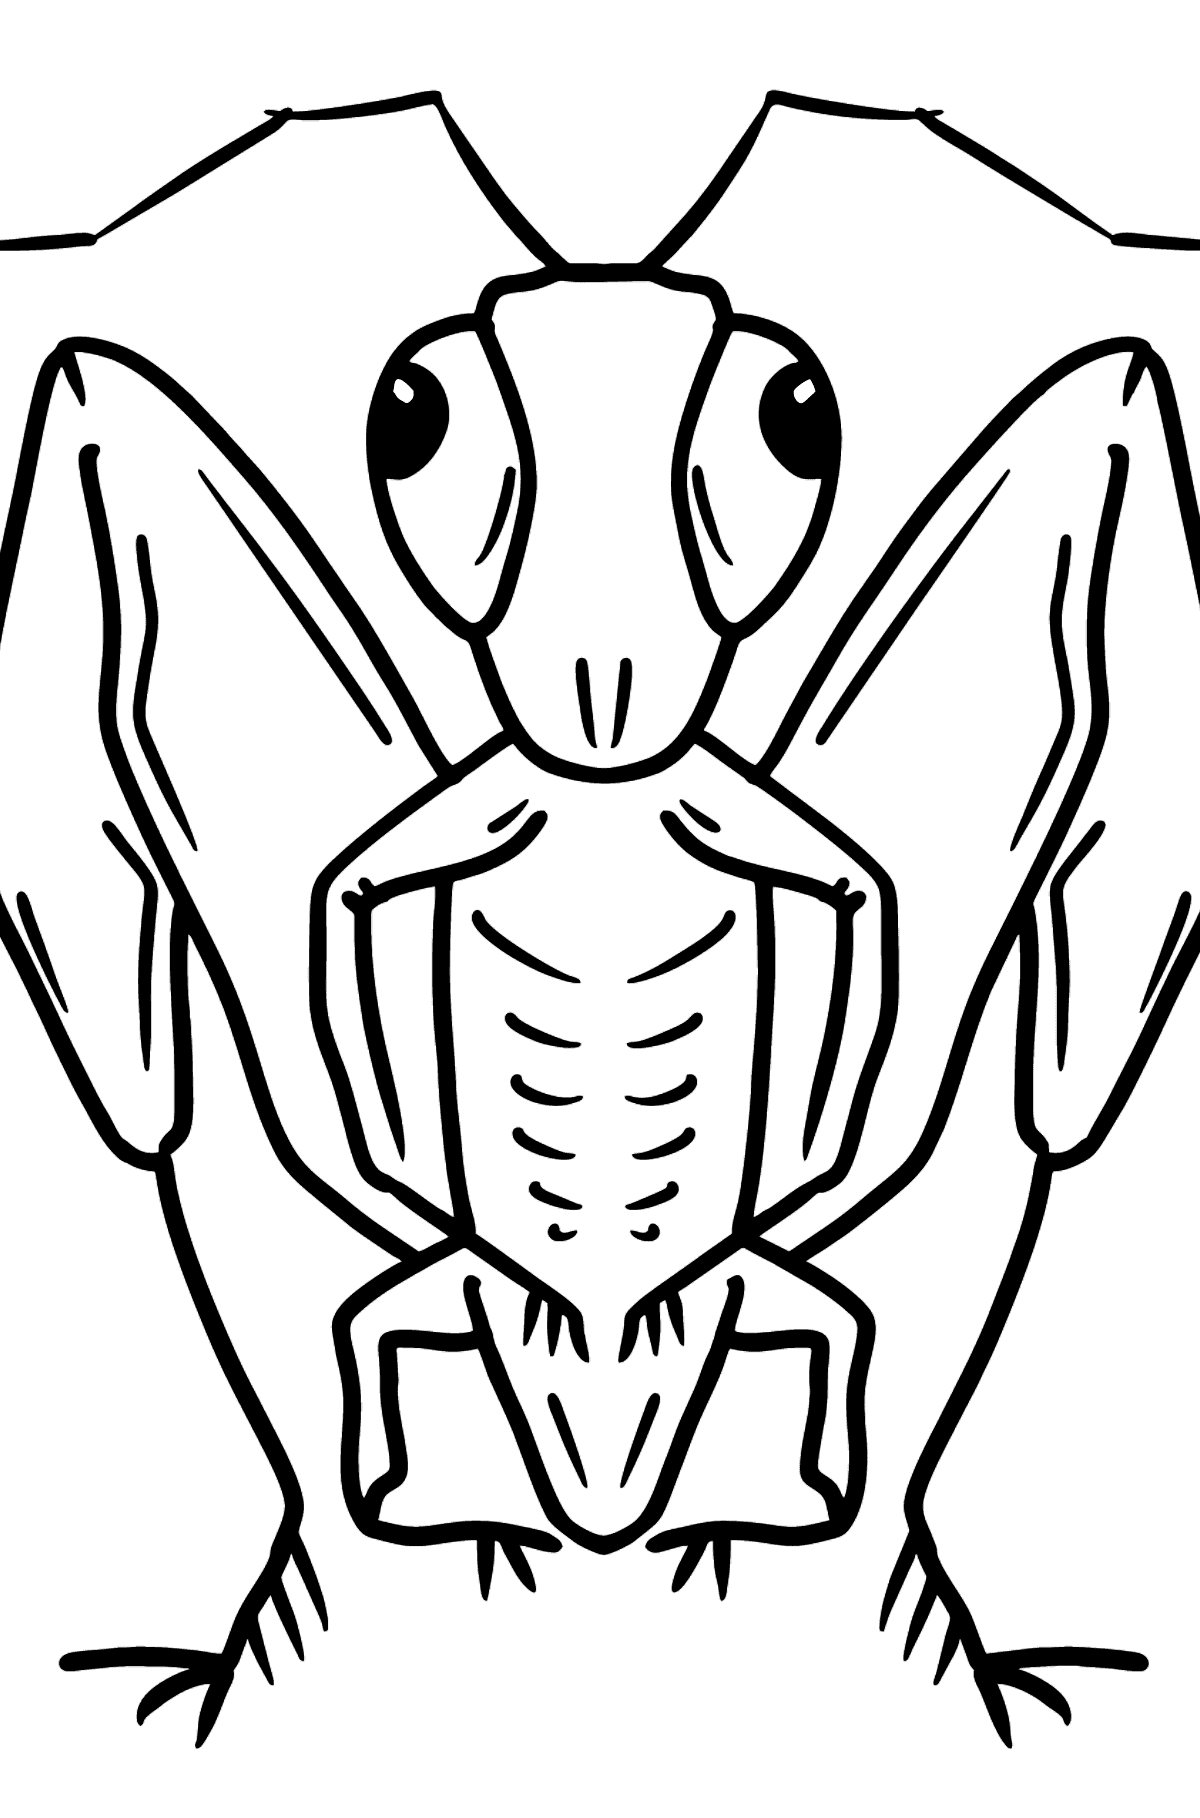 Grasshopper coloring page - Coloring Pages for Kids